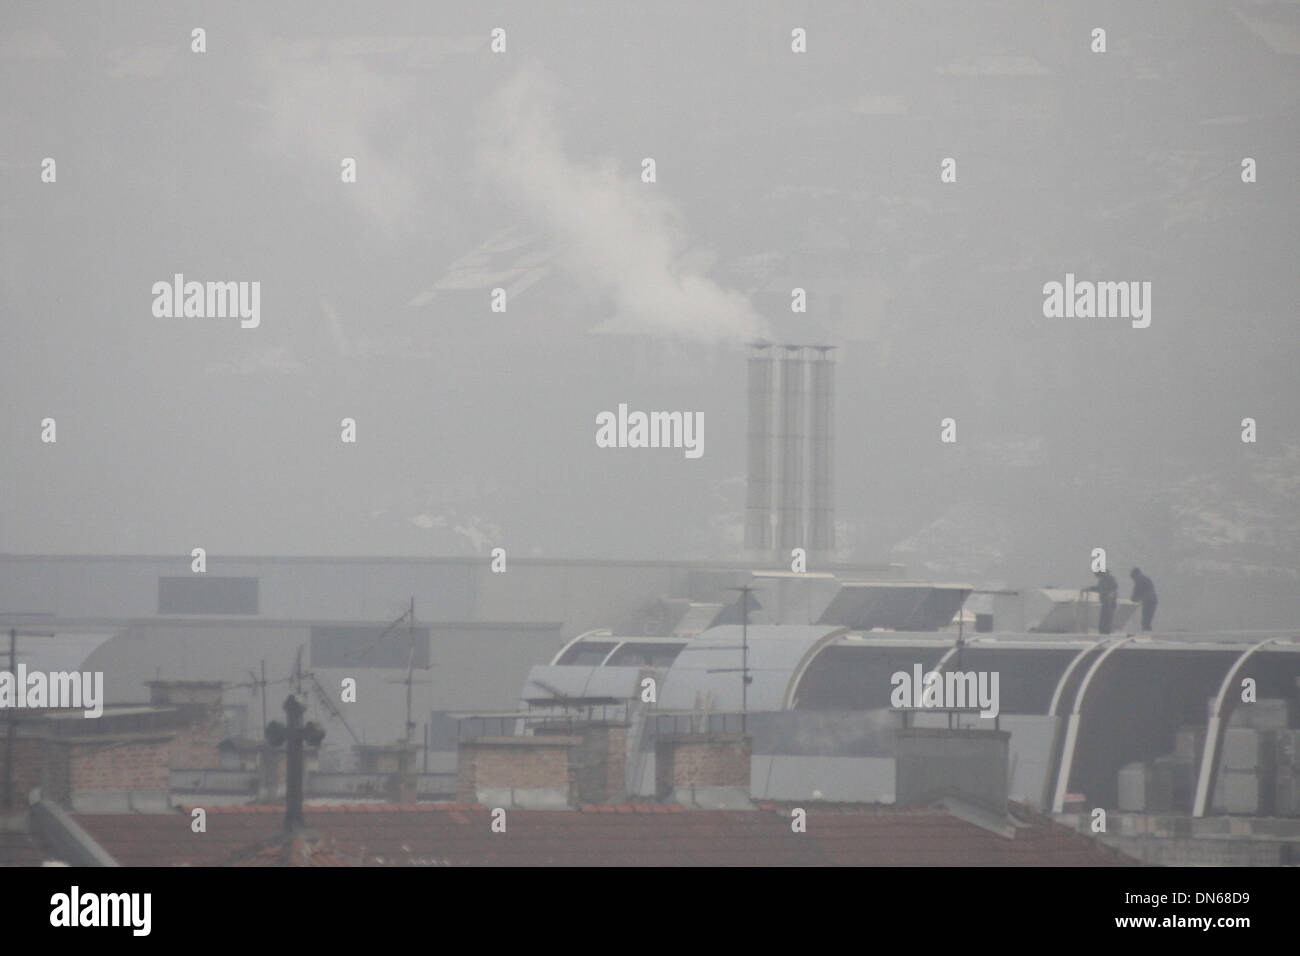 Sarajevo, Bosnia and Herzegovina. 19th Dec, 2013. Sweepers clean chimneys on roofs of buildings in Sarajevo, capital of Bosnia and Herzegovina, on Dec. 19, 2013. Air pollution in winter in Sarajevo became serious due to burning of coal and woods as well as the location of the city, which is surrounded by mountains. Credit:  Haris Memija/Xinhua/Alamy Live News Stock Photo